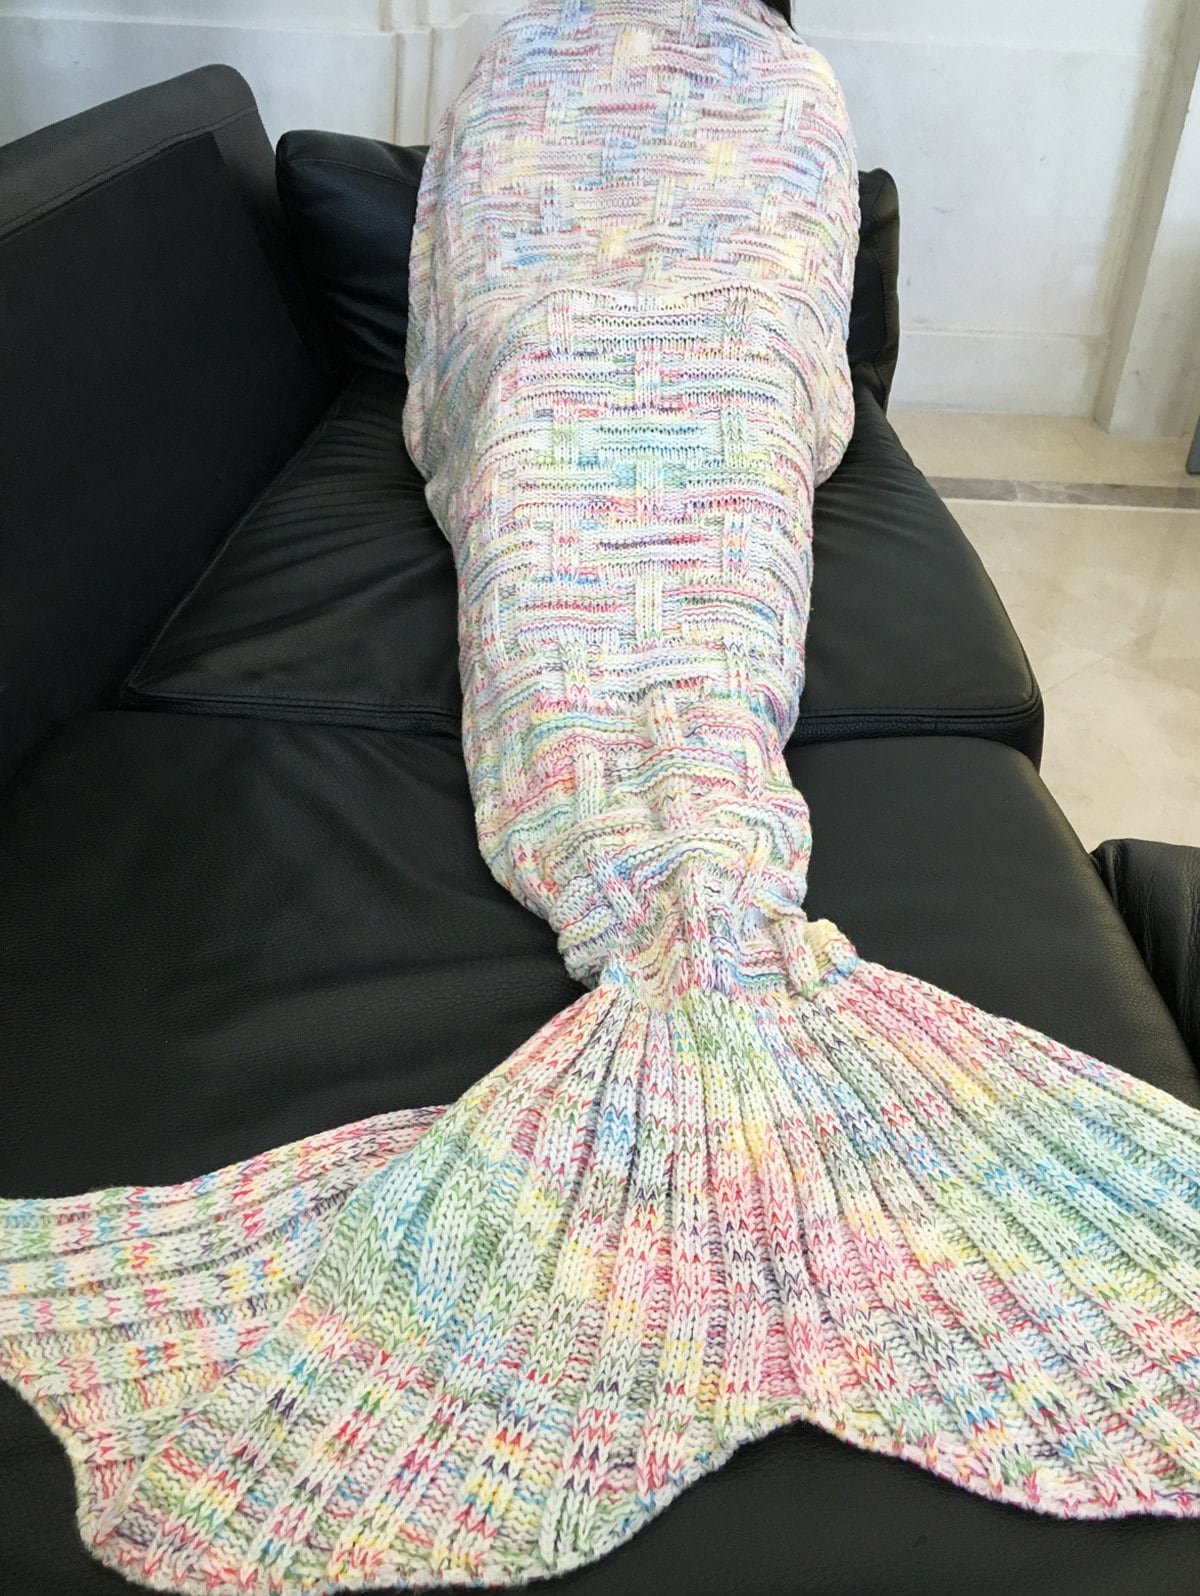 Chic Quality Colorful Geometric Pattern Wool Knitted Mermaid Tail Design Blanket